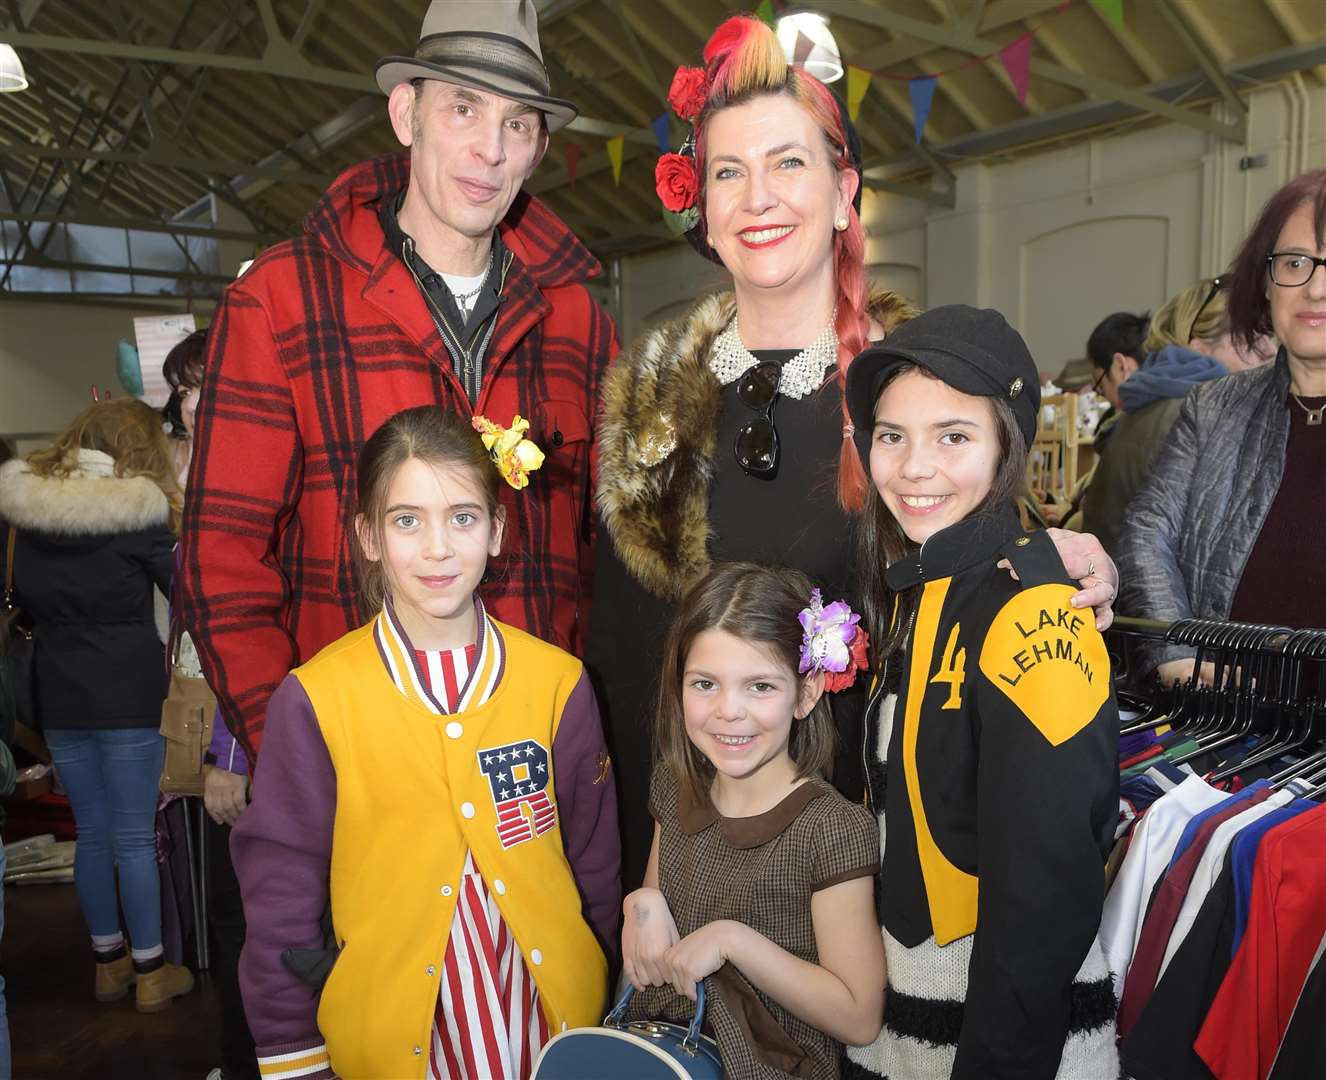 Find treasures for all the family at the vintage fair